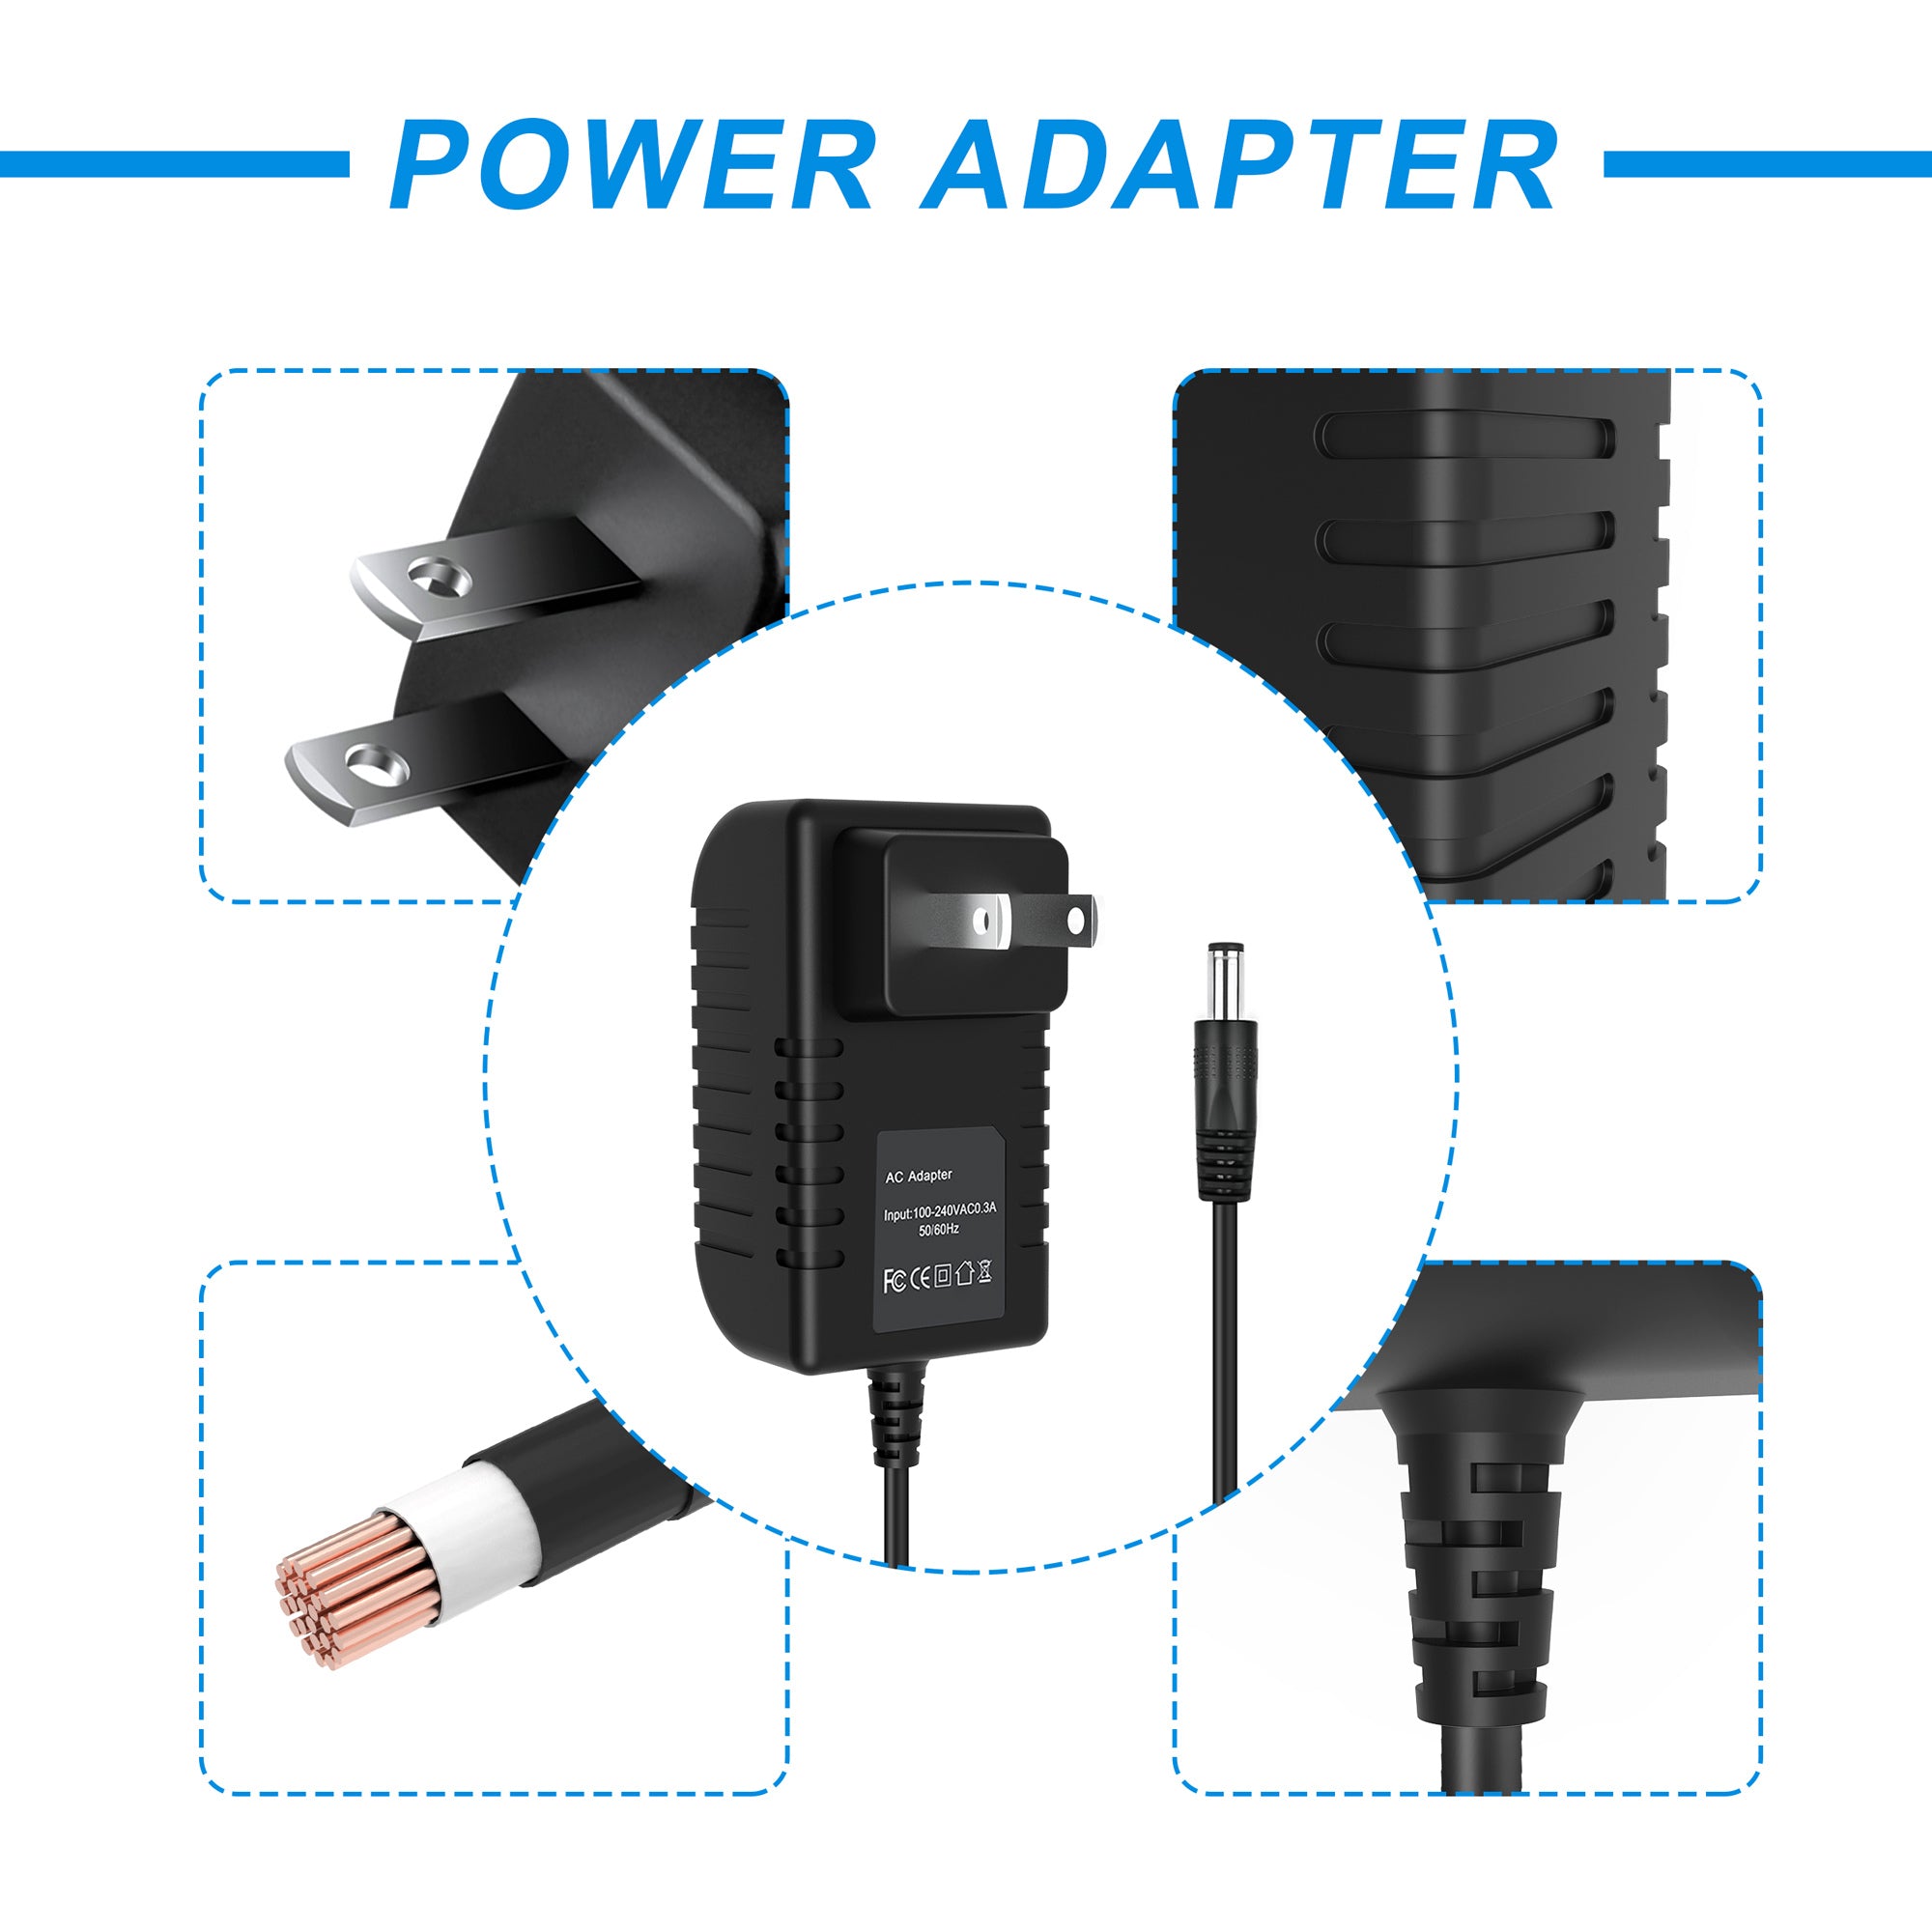 AbleGrid AC Adapter Charger Compatible with 411203OO3CT 411203003CT TELEPHONE Power Supply Cord Cable